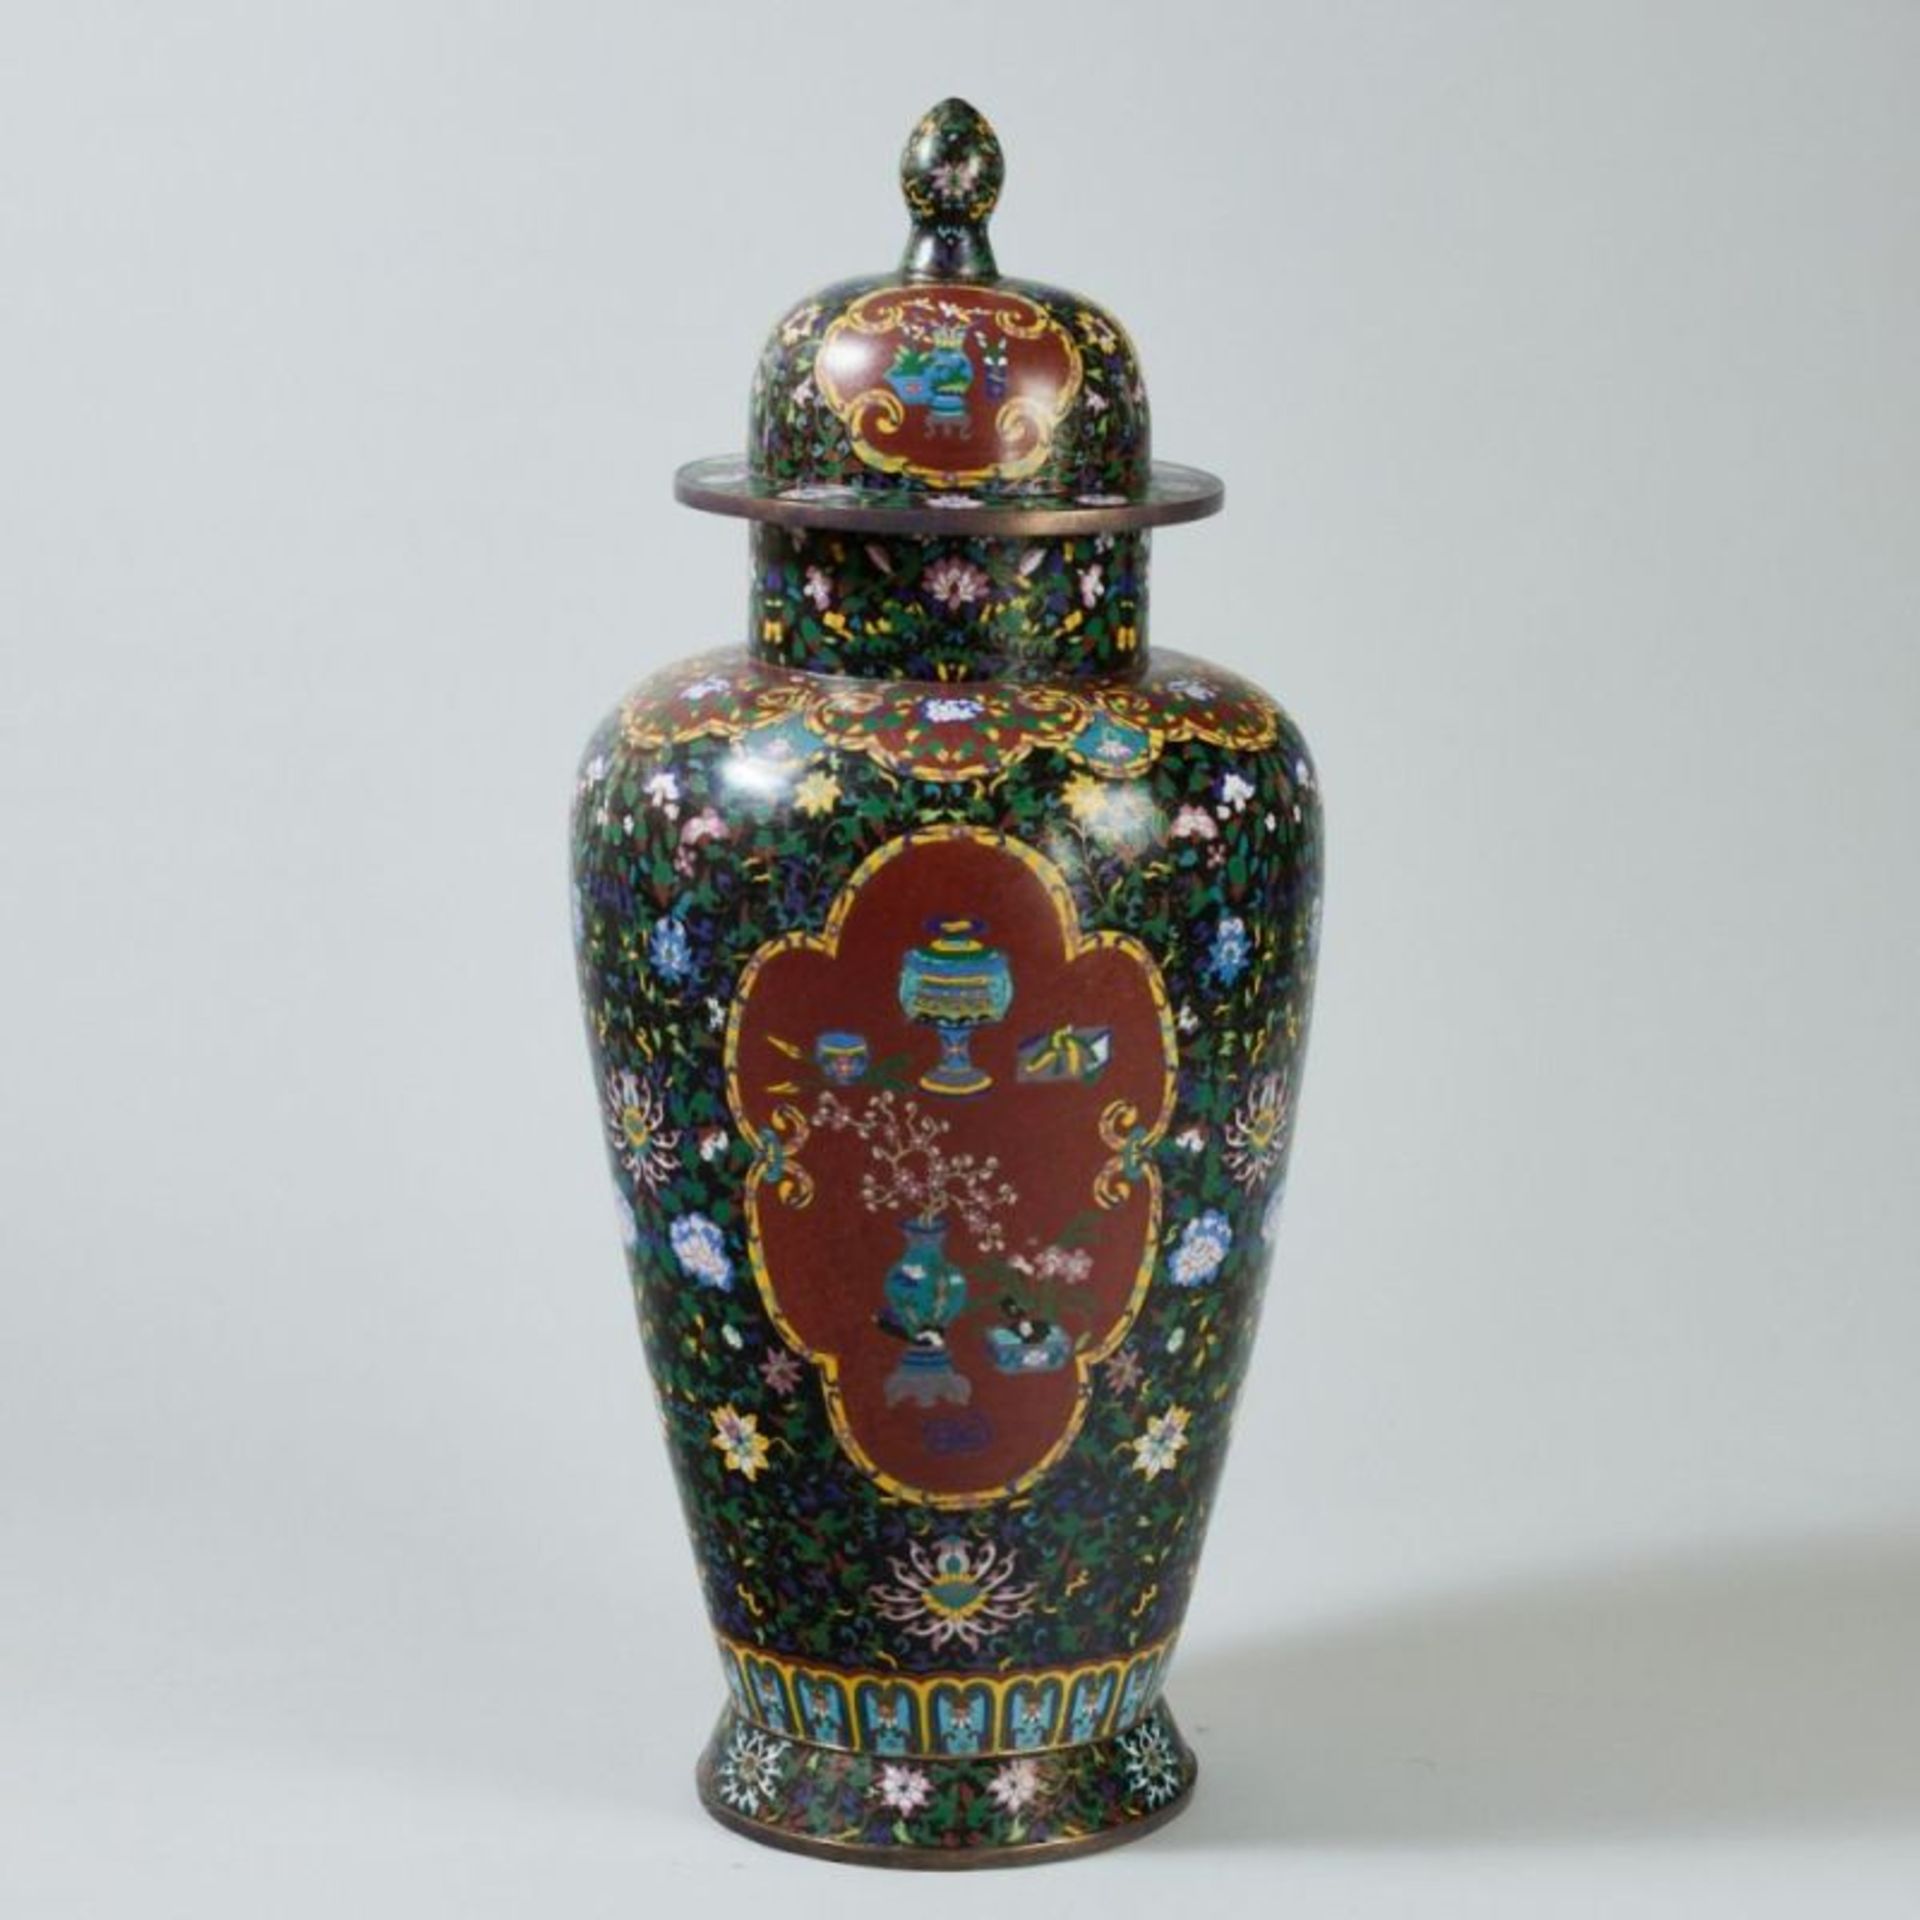 Cloisonné Bodenvase, China, wohl Anfang 20. Jahrhundert - Image 3 of 3